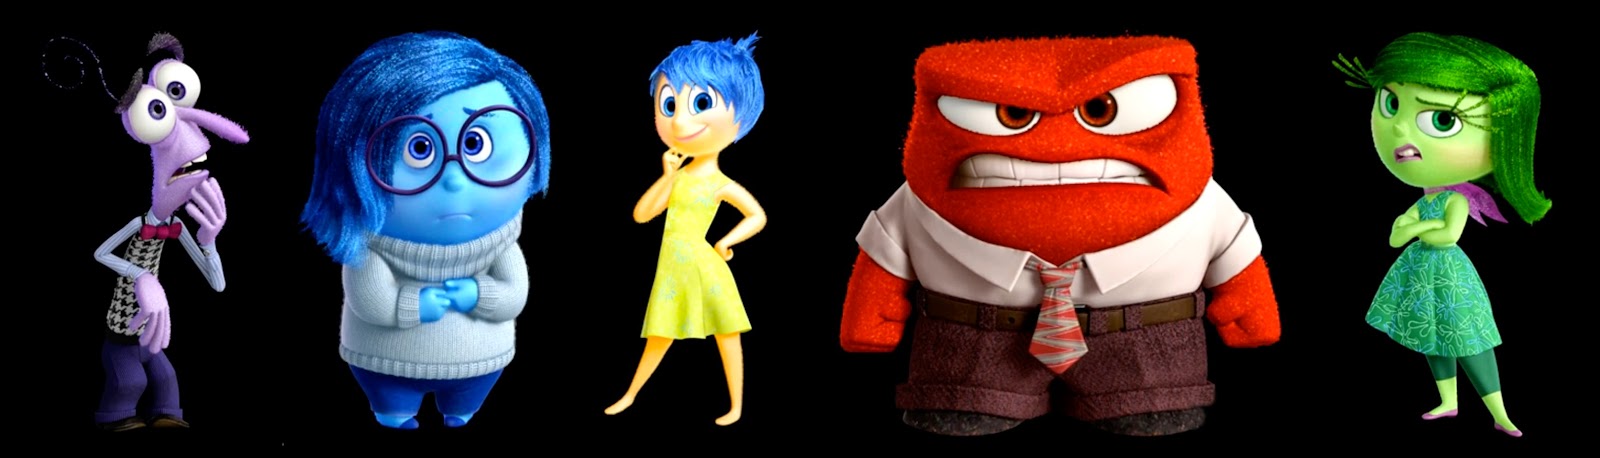 Take a look Behind-The-Scenes of Pixar's 'Inside Out' - First Look At